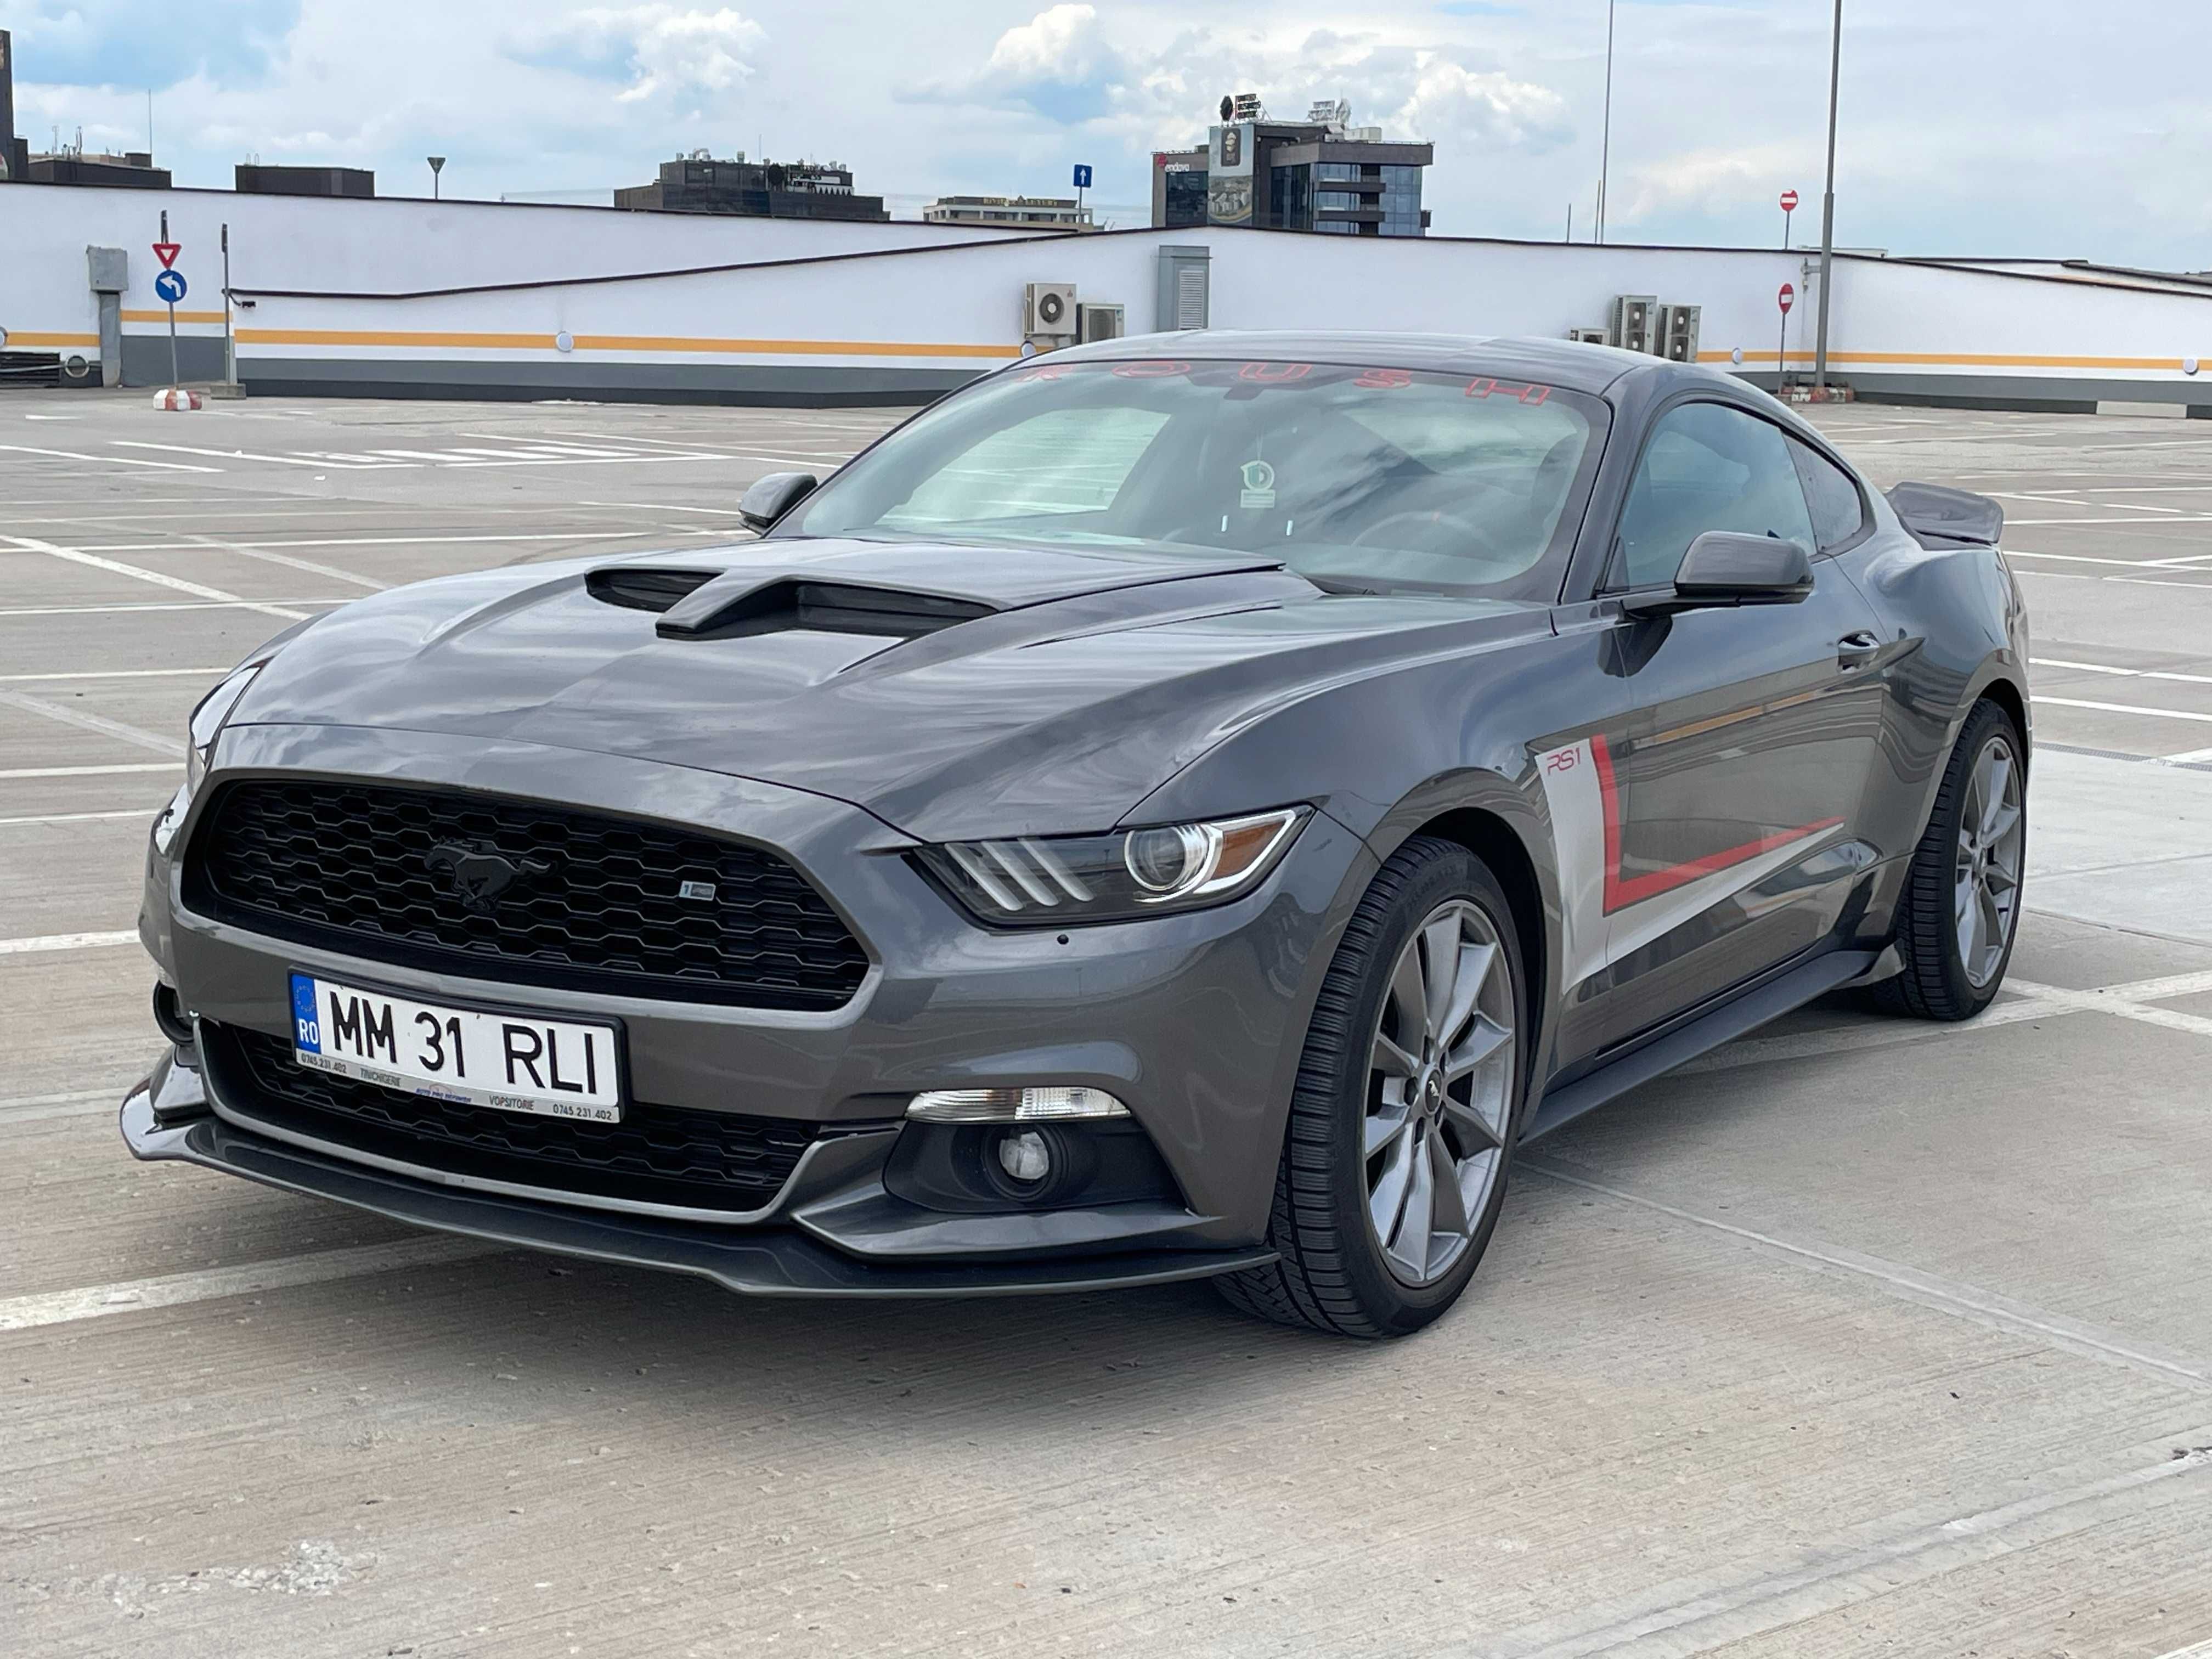 VAND URGENT Ford Mustang 2015 2.3L